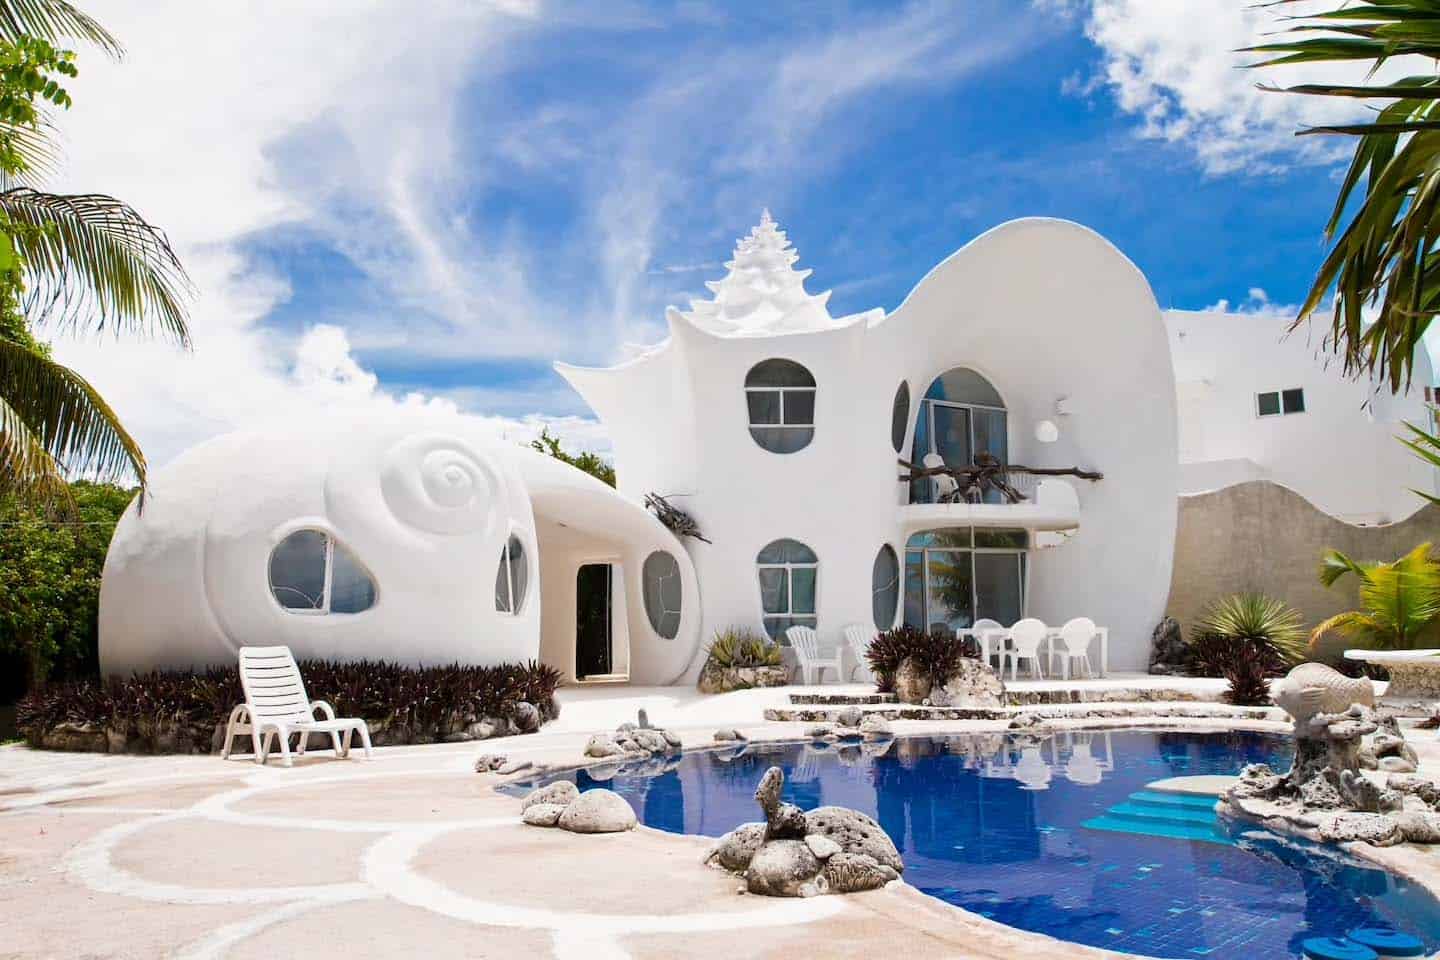 The Shell House - Mexico